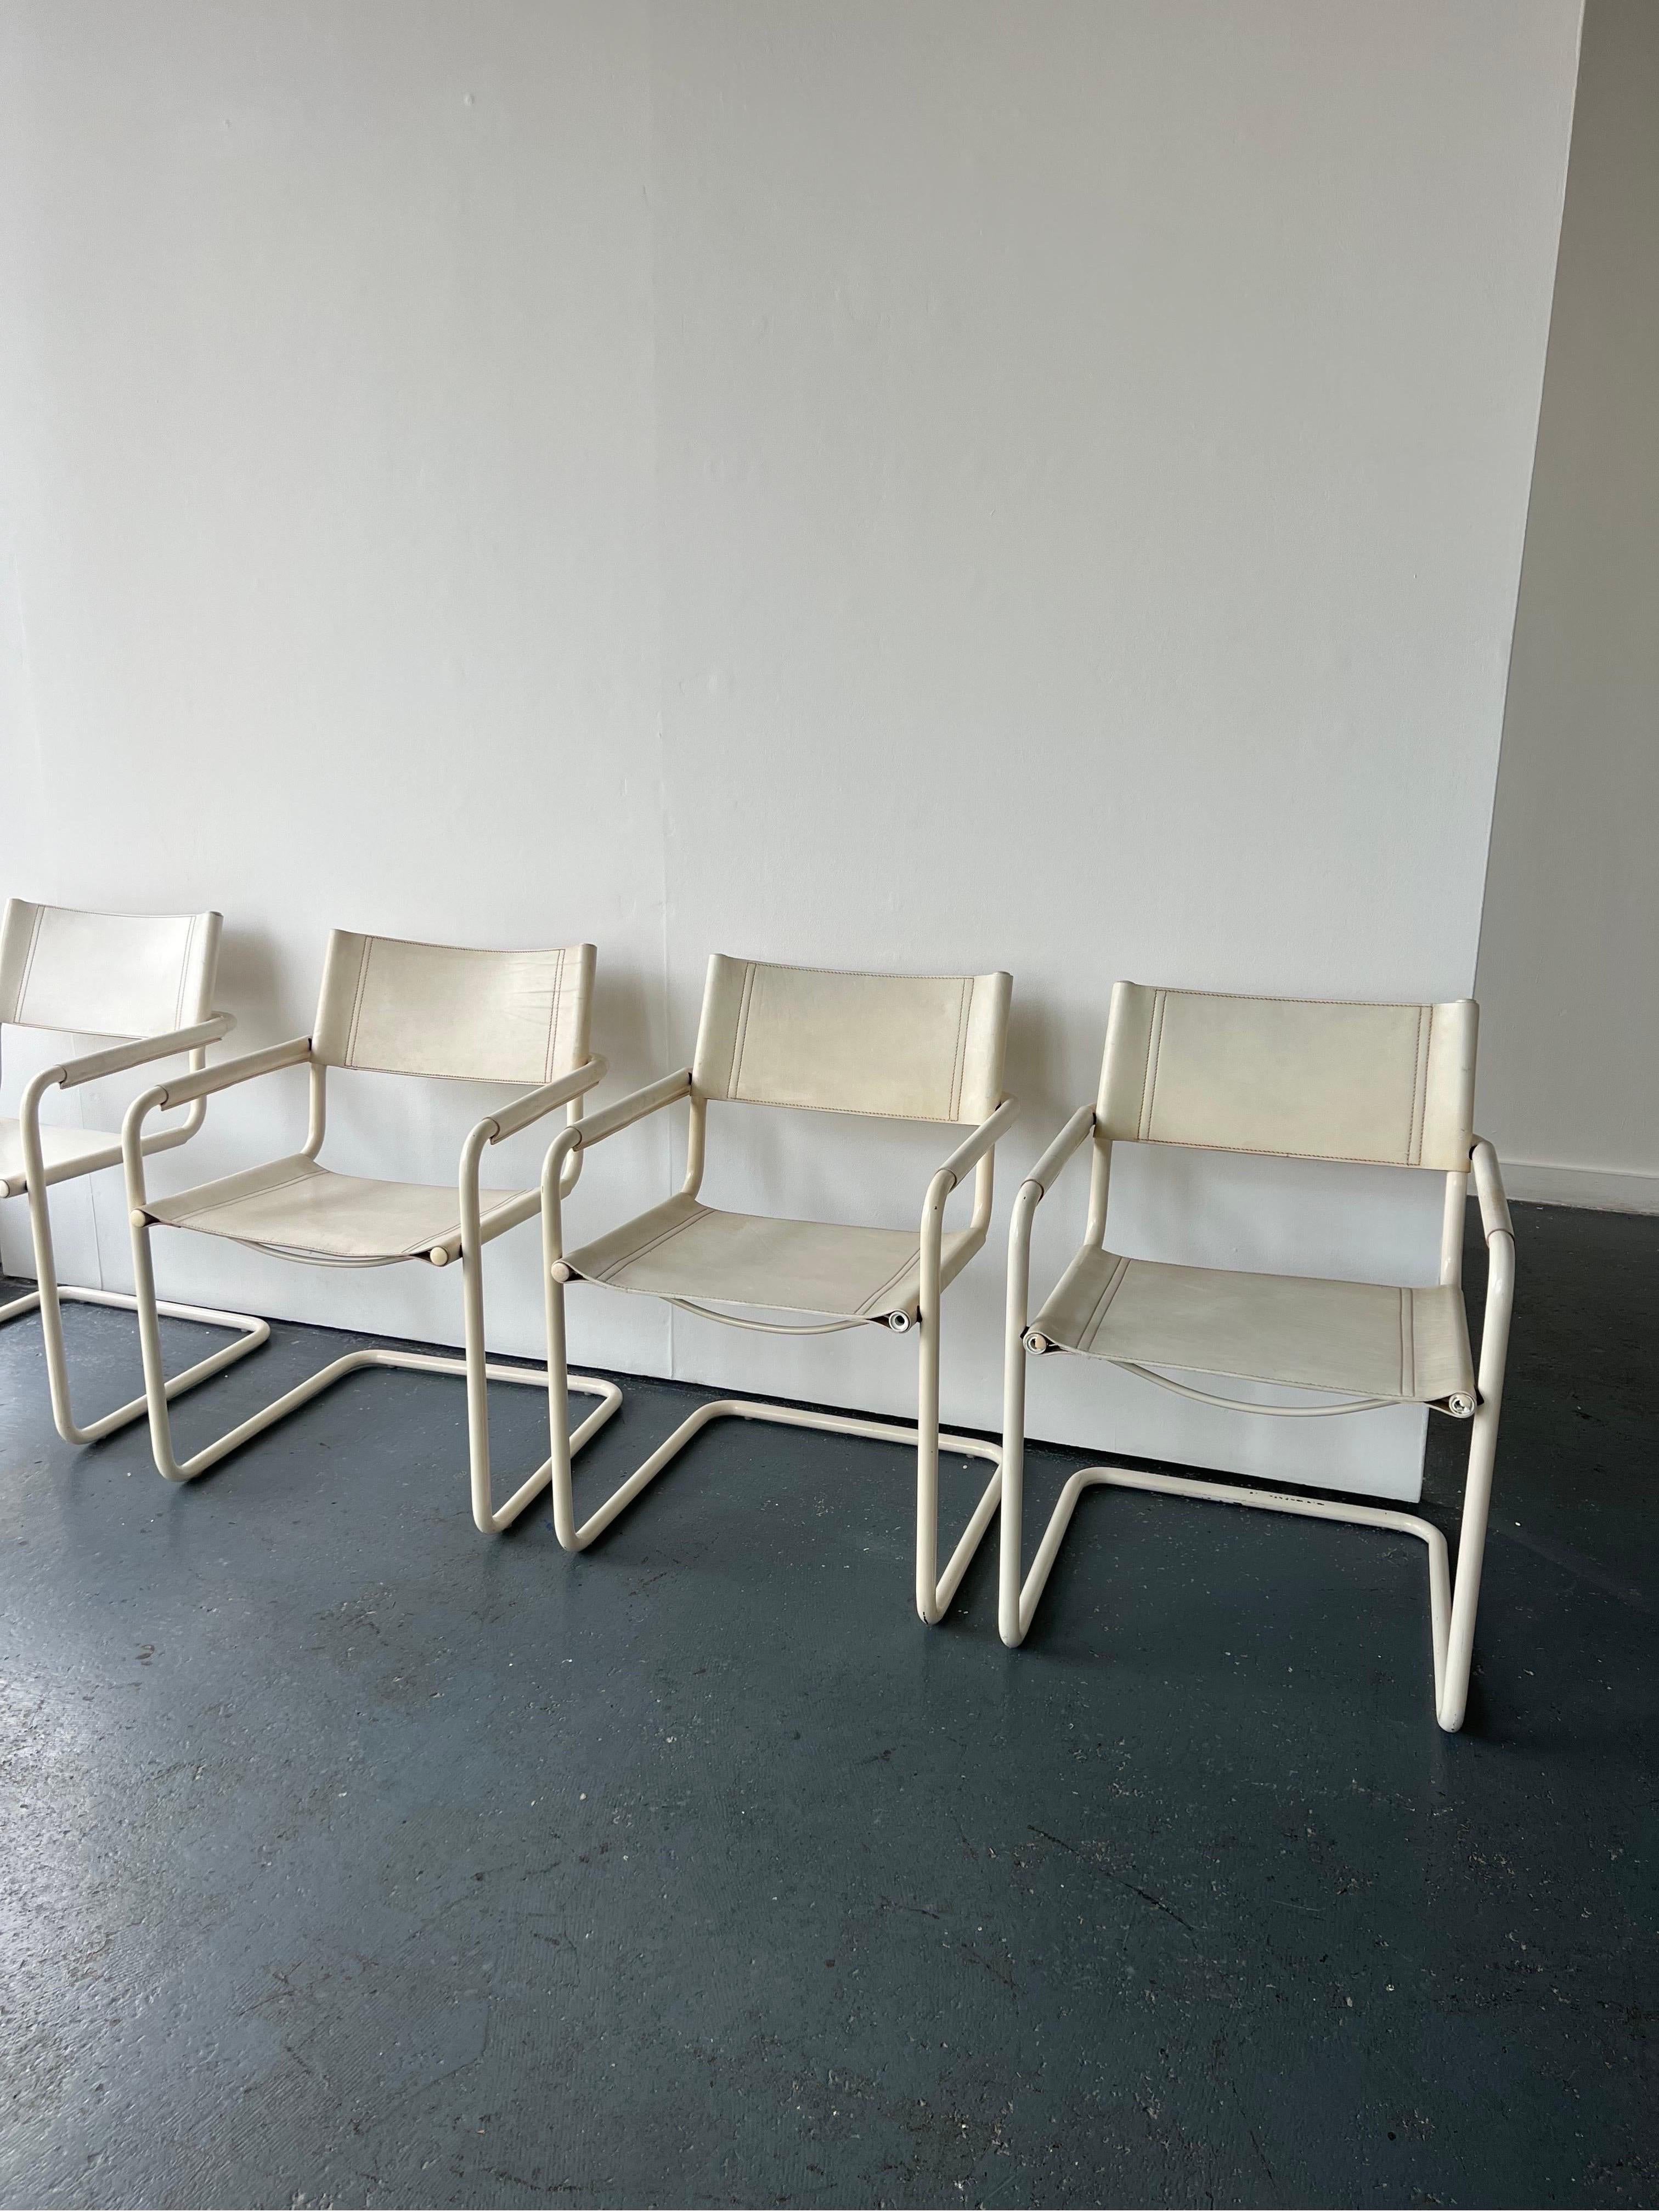 Italian Set of 4 Cantilevered MG5 Dining Chairs Designed by Breuer Made by Matteo Grassi